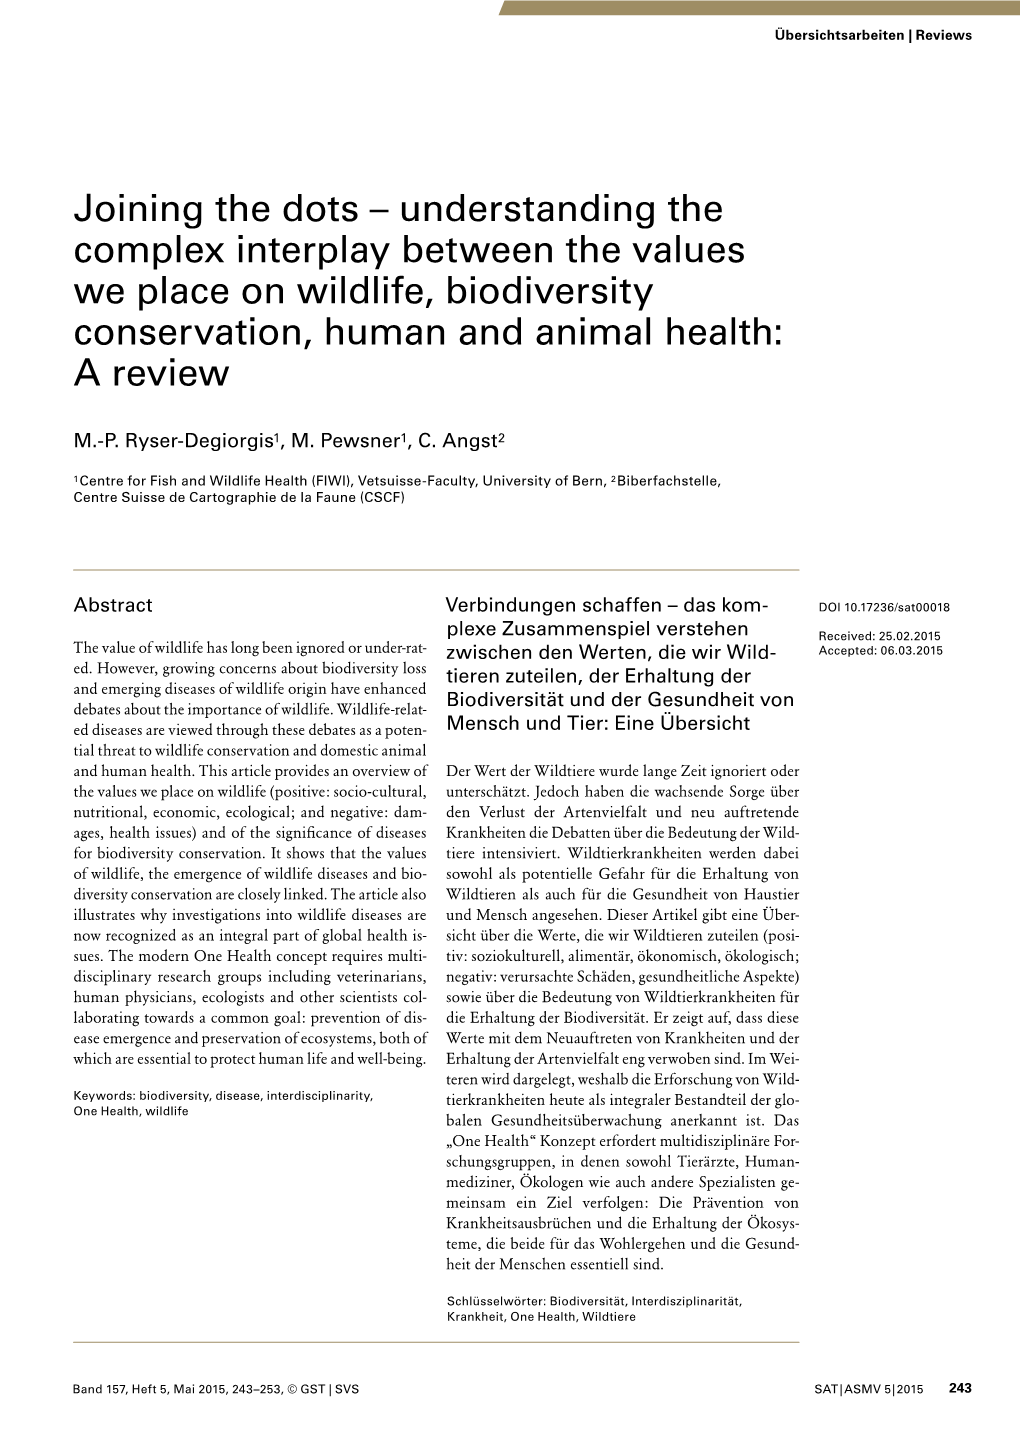 Understanding the Complex Interplay Between the Values We Place on Wildlife, Biodiversity Conservation, Human and Animal Health: a Review